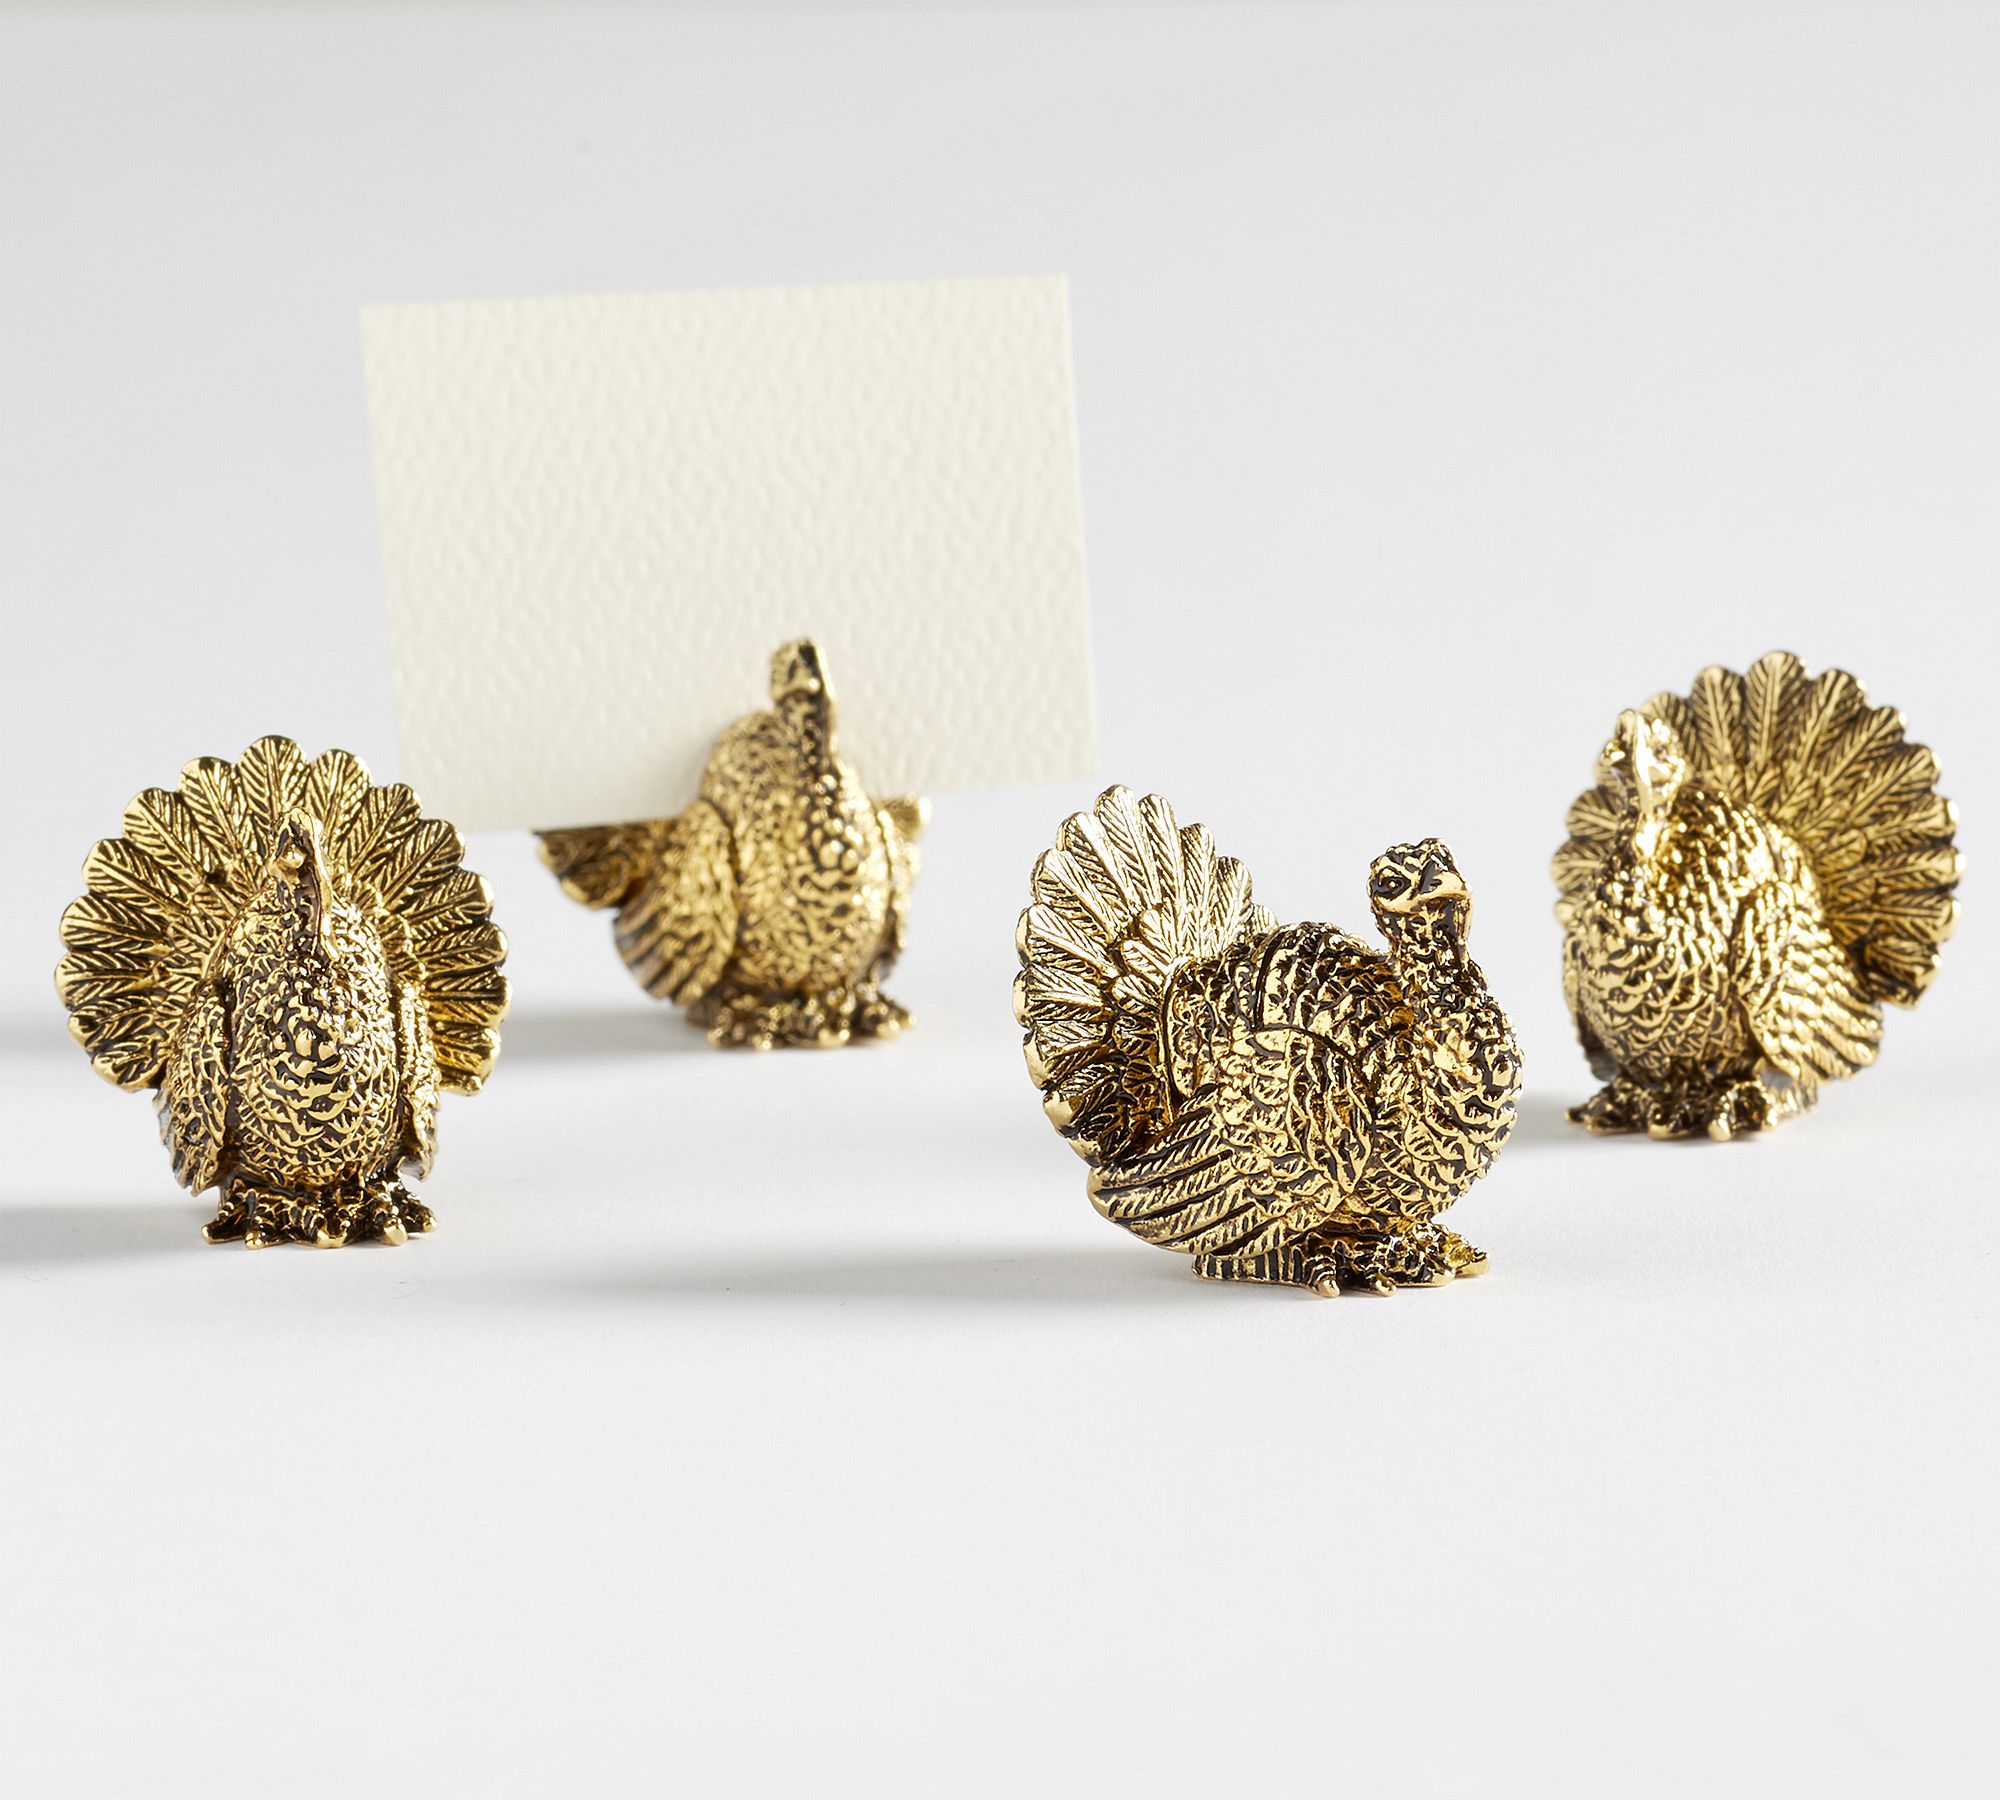 Gold Turkey Place Card Holders - Set of 4